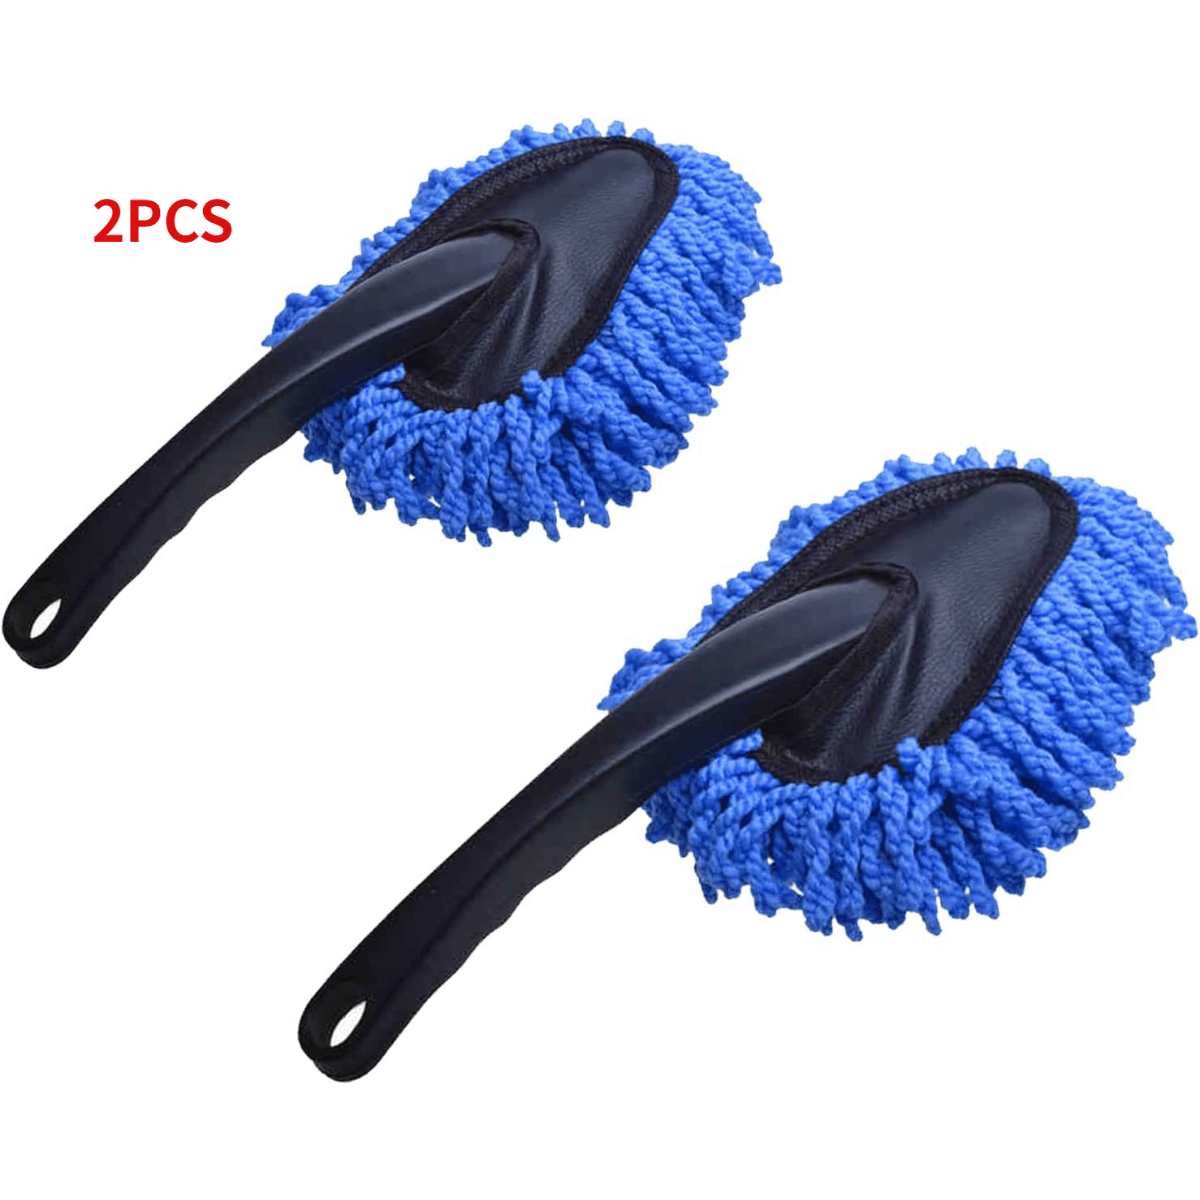 Multi Functional Car Brush Duster Dusting Tool Mop for Closets RV